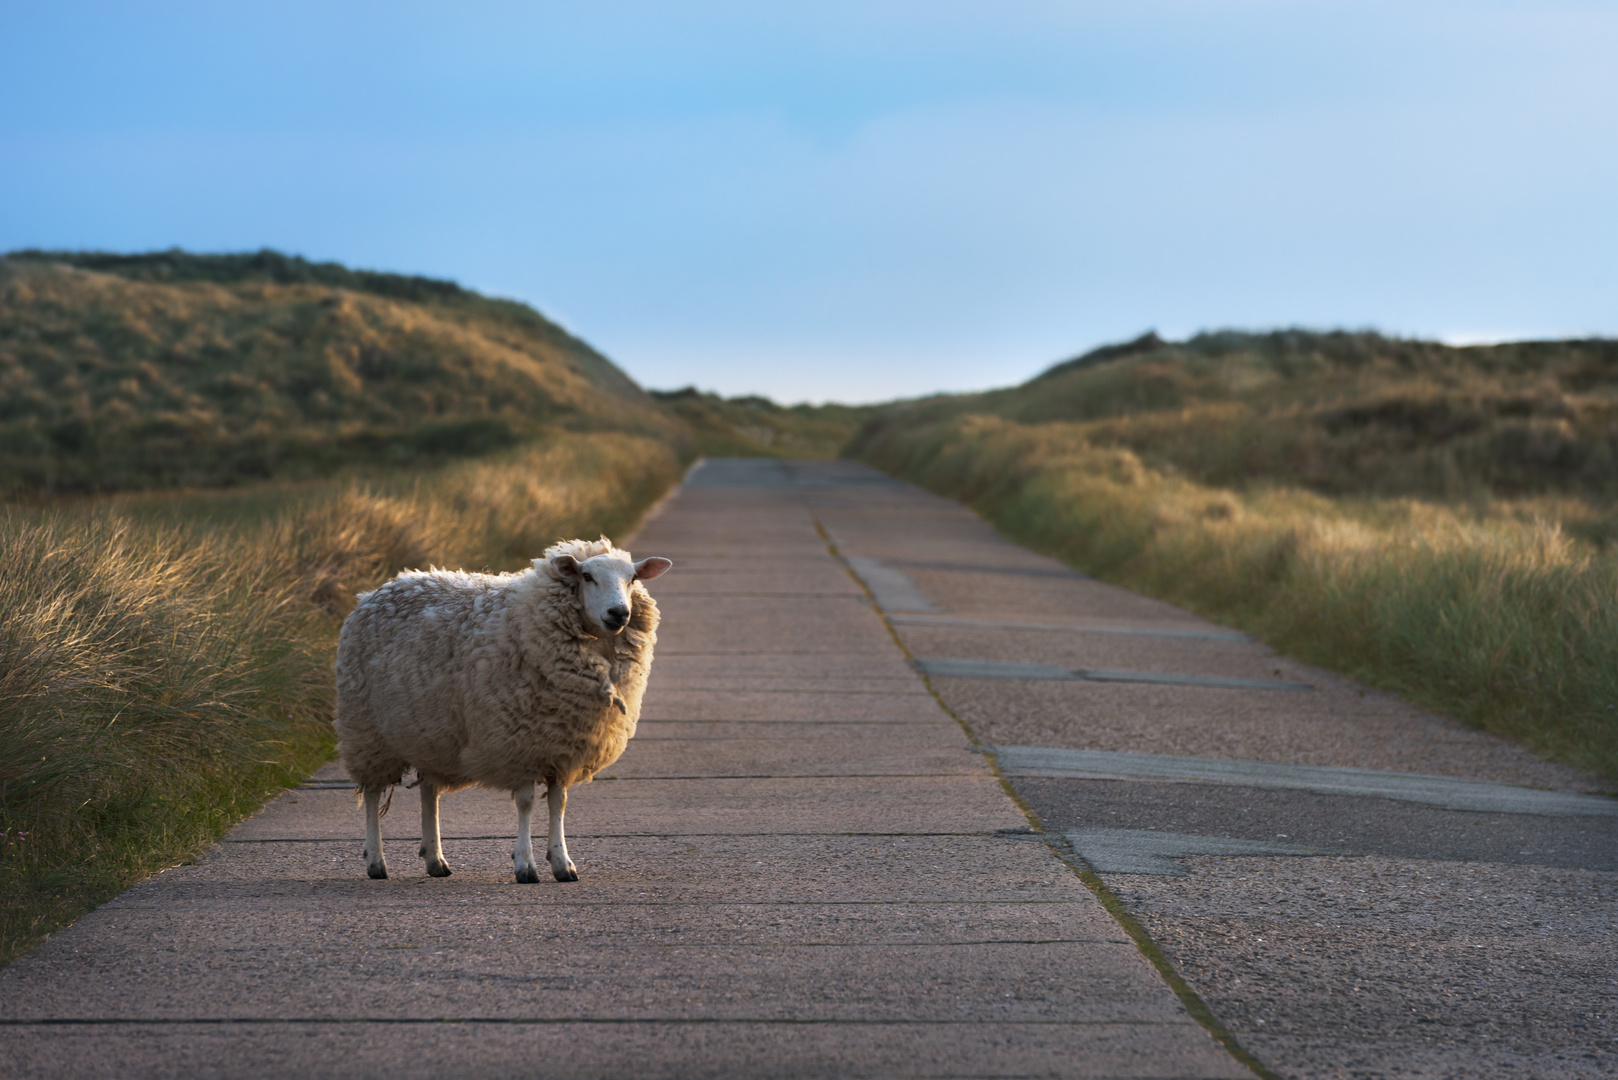 Single sheep on an empty road facing the camera